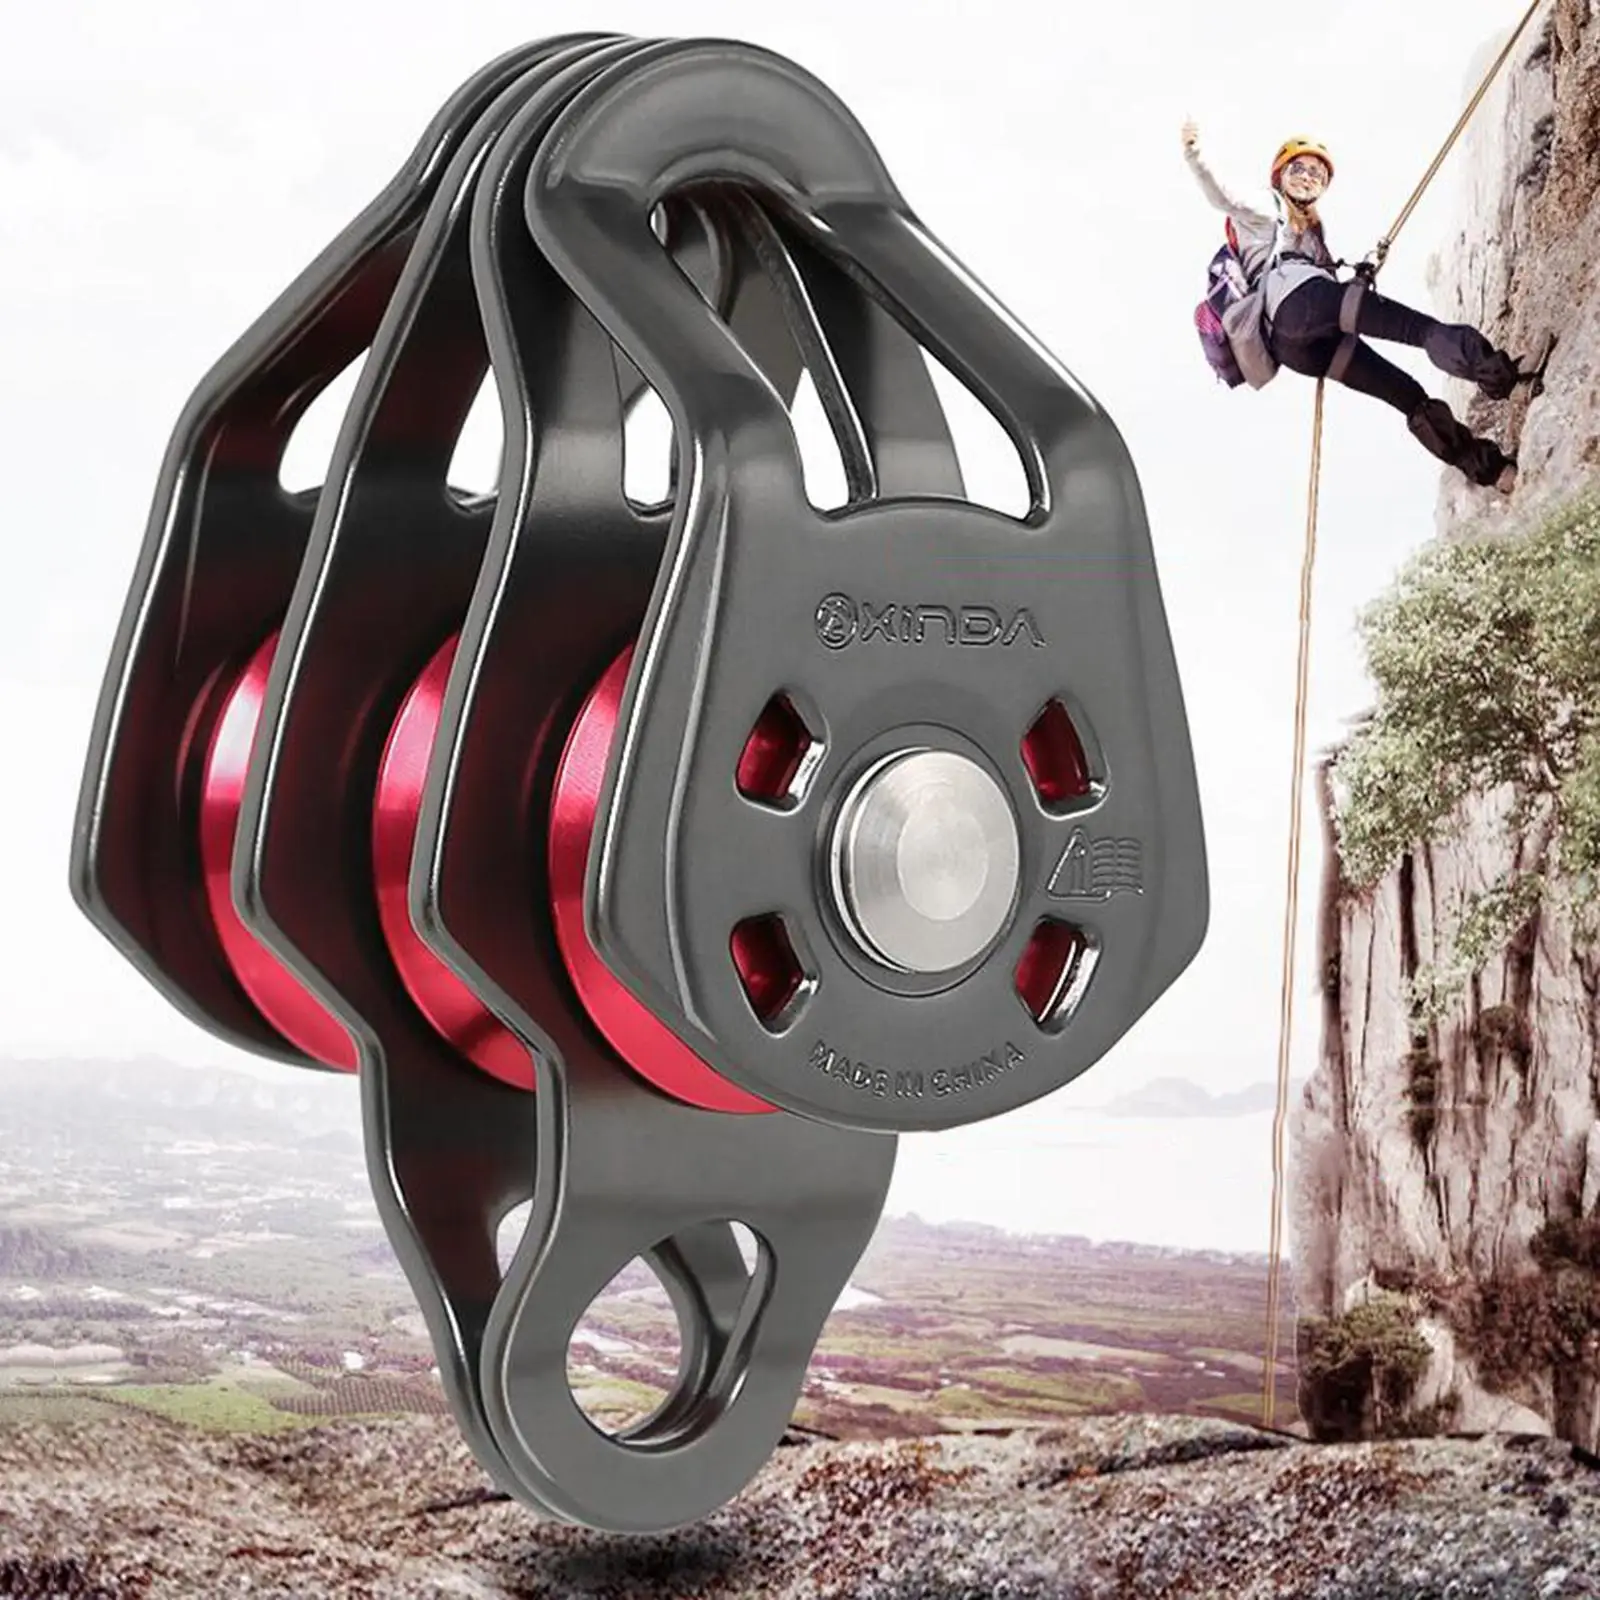  Pulley  Rope Pulley Rock Climbing  Equipment  ,for Climbing, , Aloft Work, Engineering Outdoor Rock Climbing